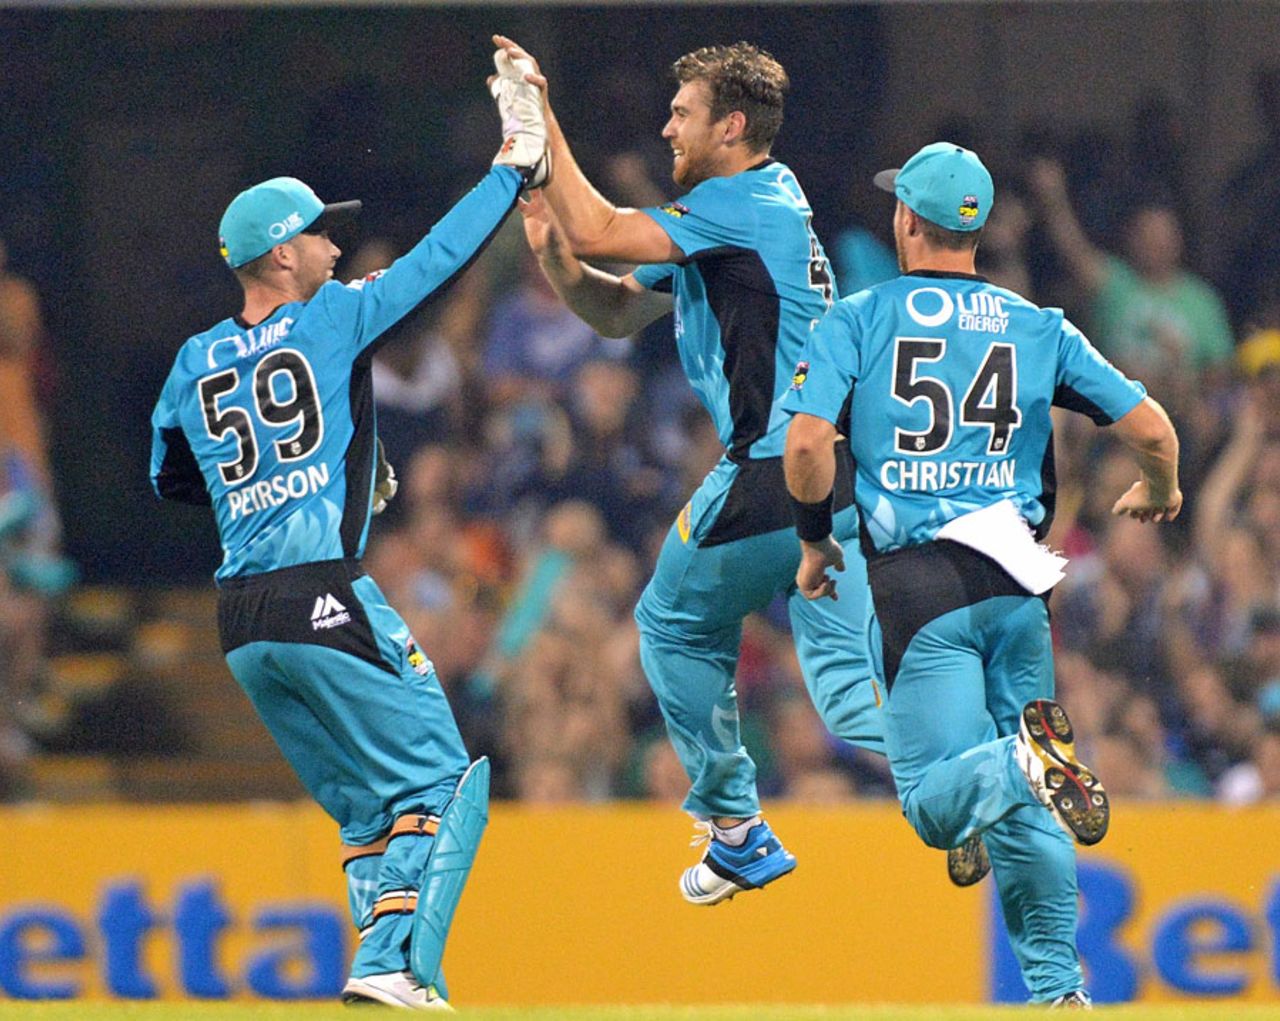 Ryan Duffield rattled the Stars top order with quick wickets, Brisbane Heat v Melbourne Stars, Big Bash League 2014-15, Brisbane, December 28, 2014